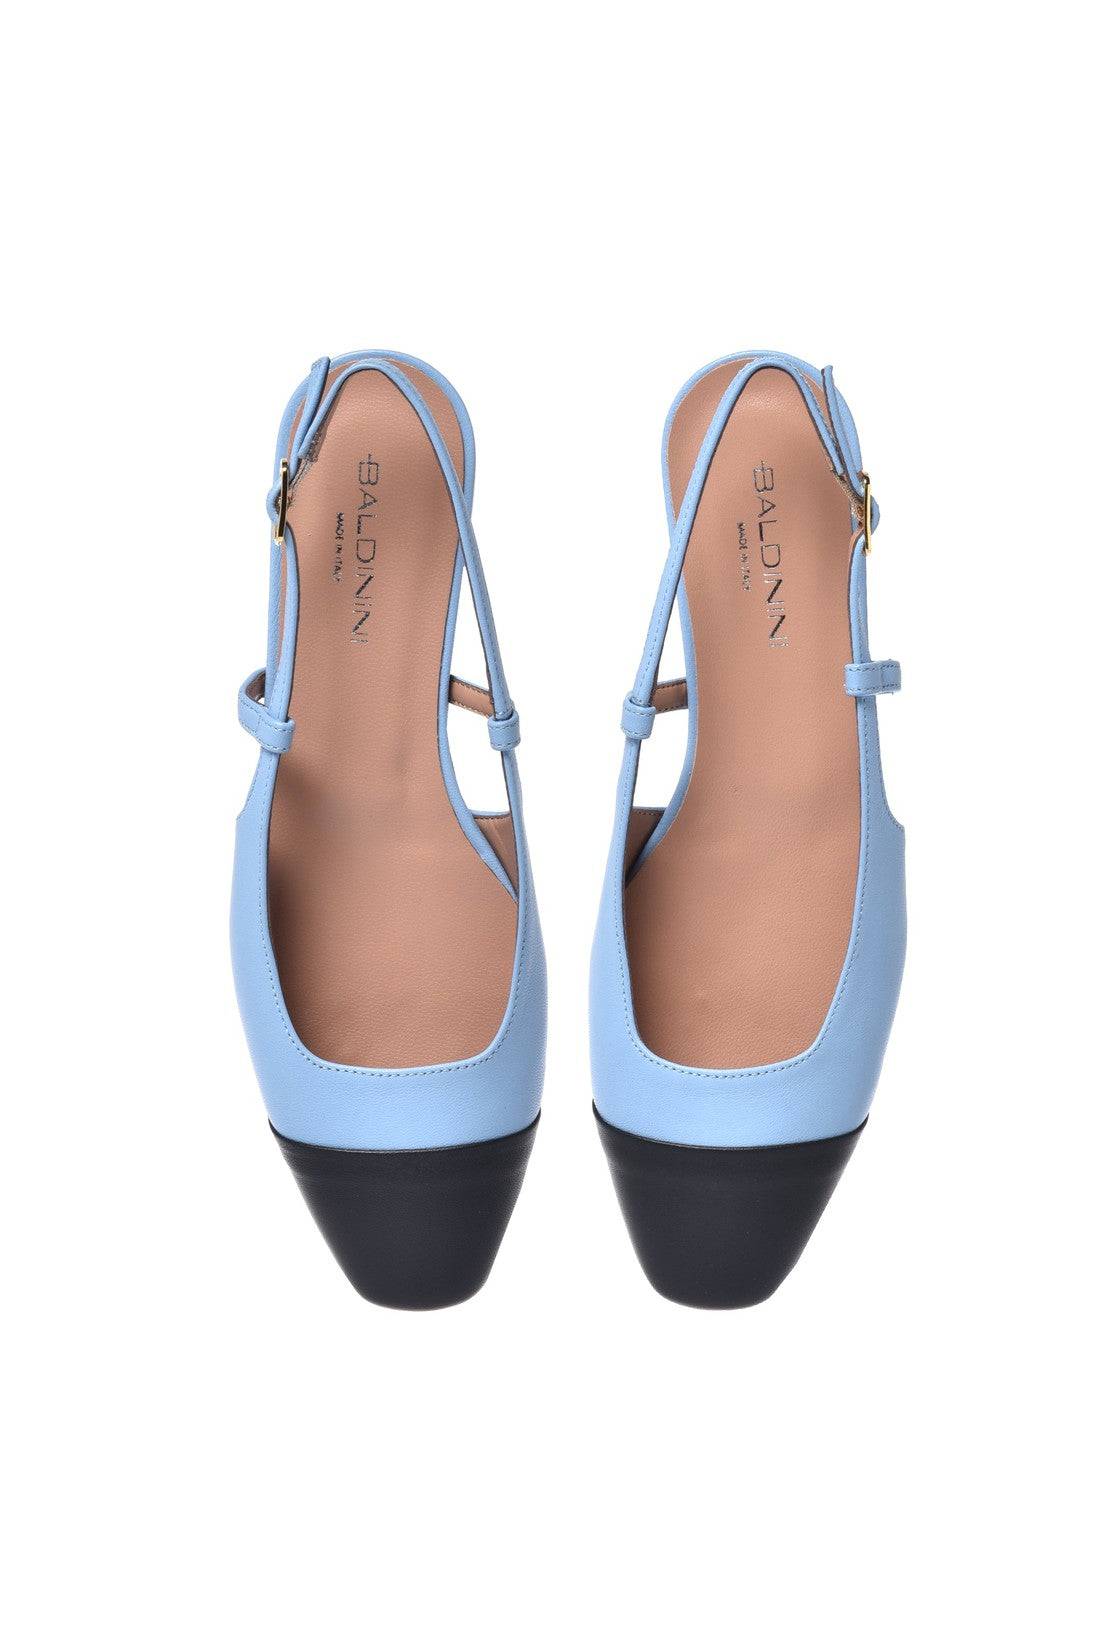 BALDININI-OUTLET-SALE-Ballerina-pump-in-black-and-light-blue-nappa-leather-Halbschuhe-ARCHIVE-COLLECTION-2.jpg